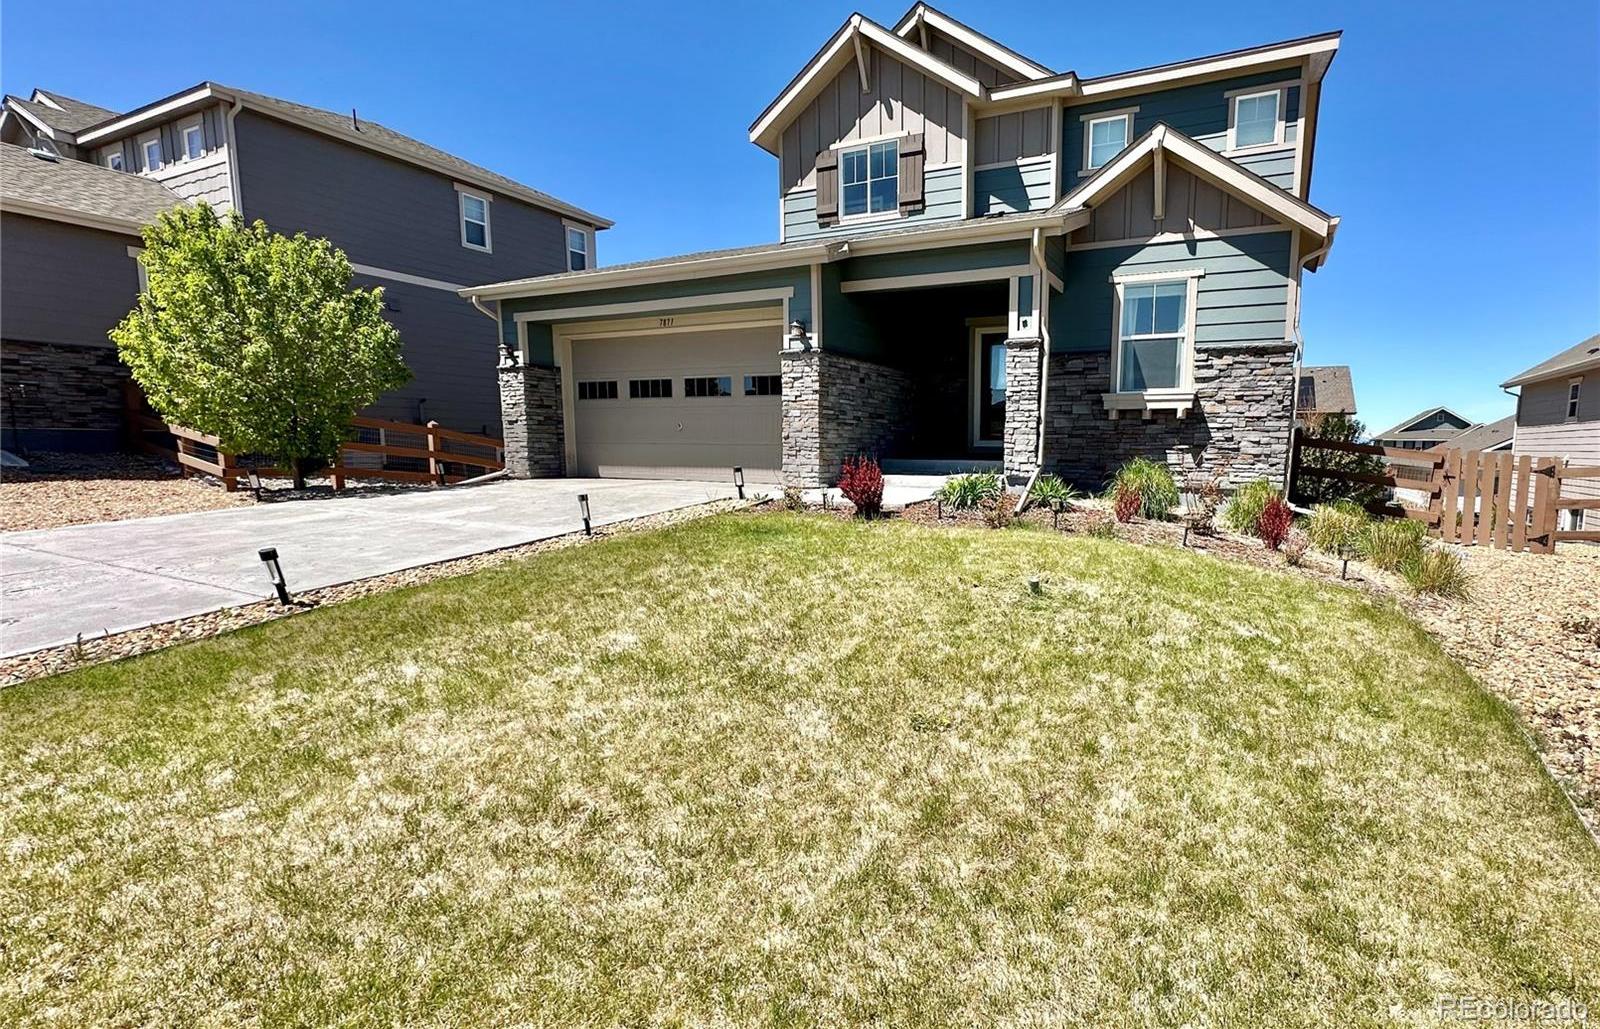 Photo one of 7871 S Fultondale Ct Aurora CO 80016 | MLS 1796054